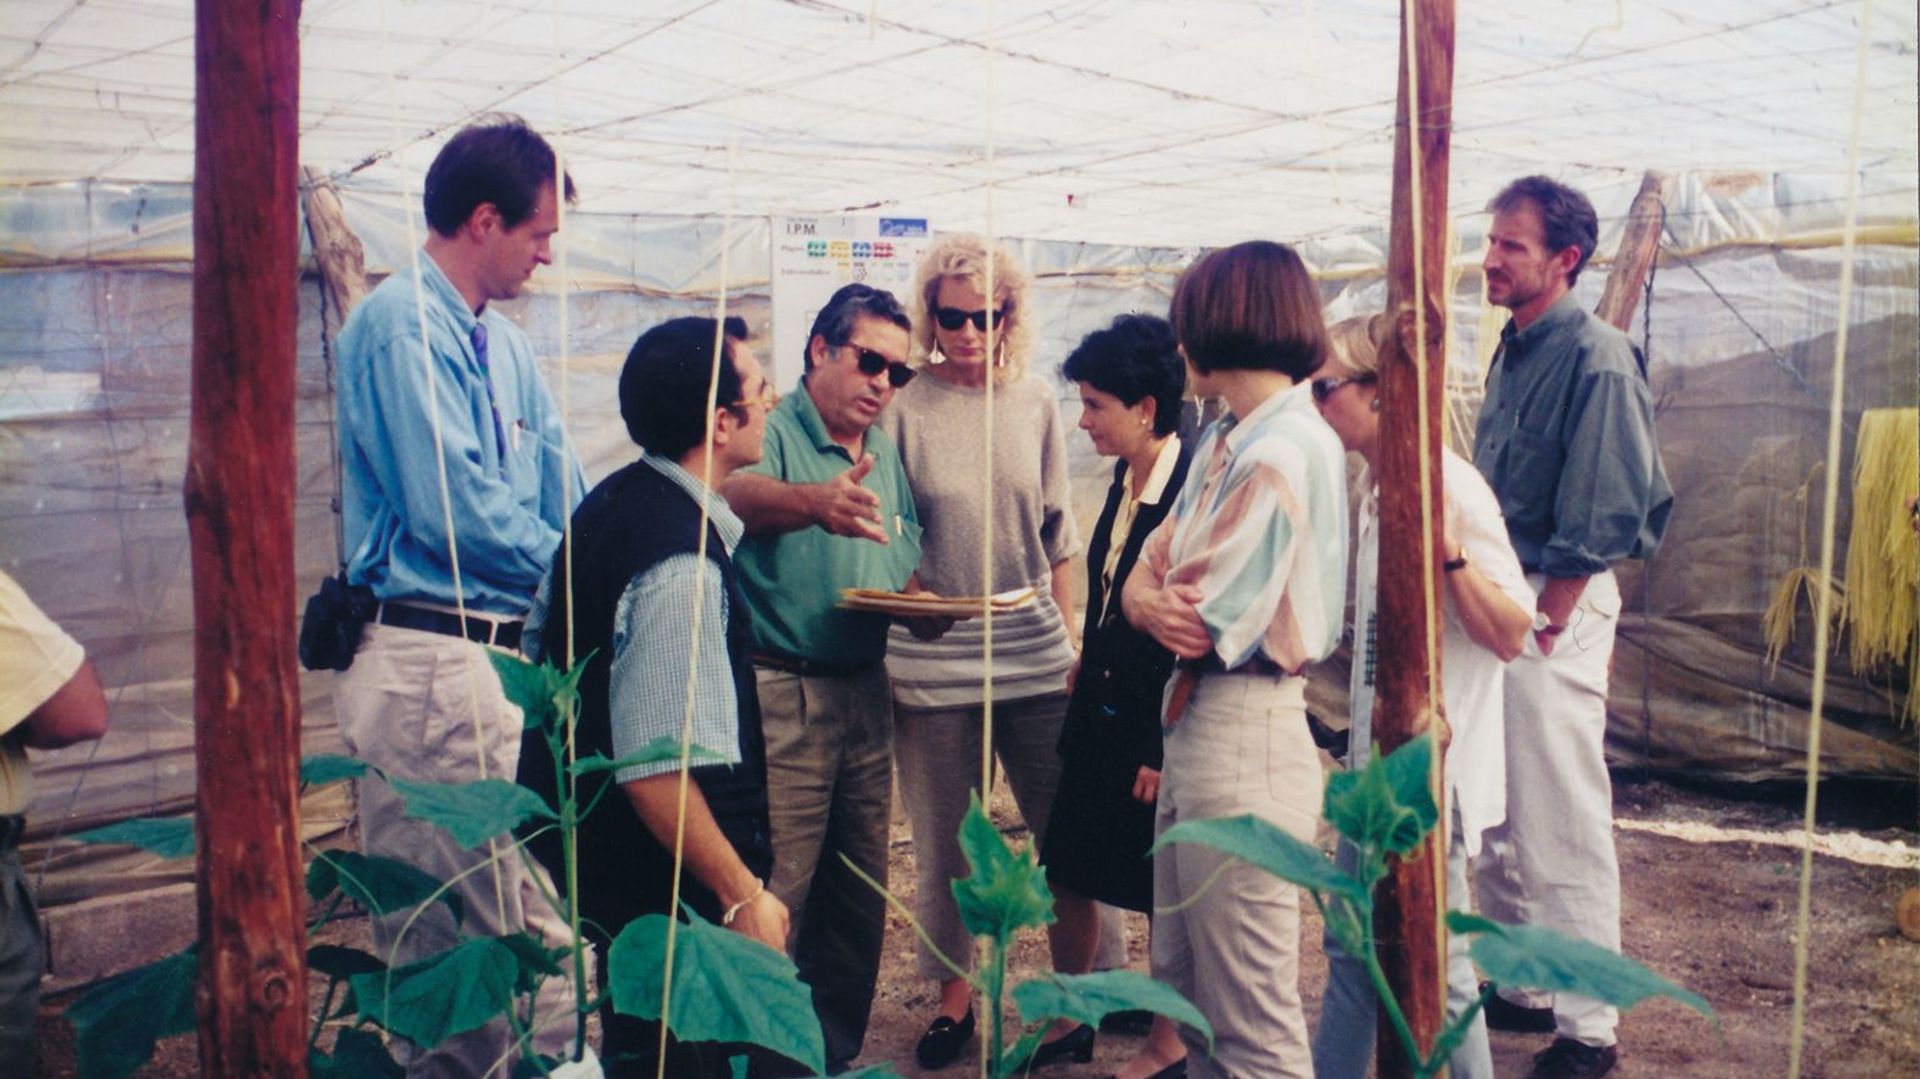 German retailer delegation under the coordination of EHI learning about practices for protecting crops in plastic greenhouses in Almeria, December 1996